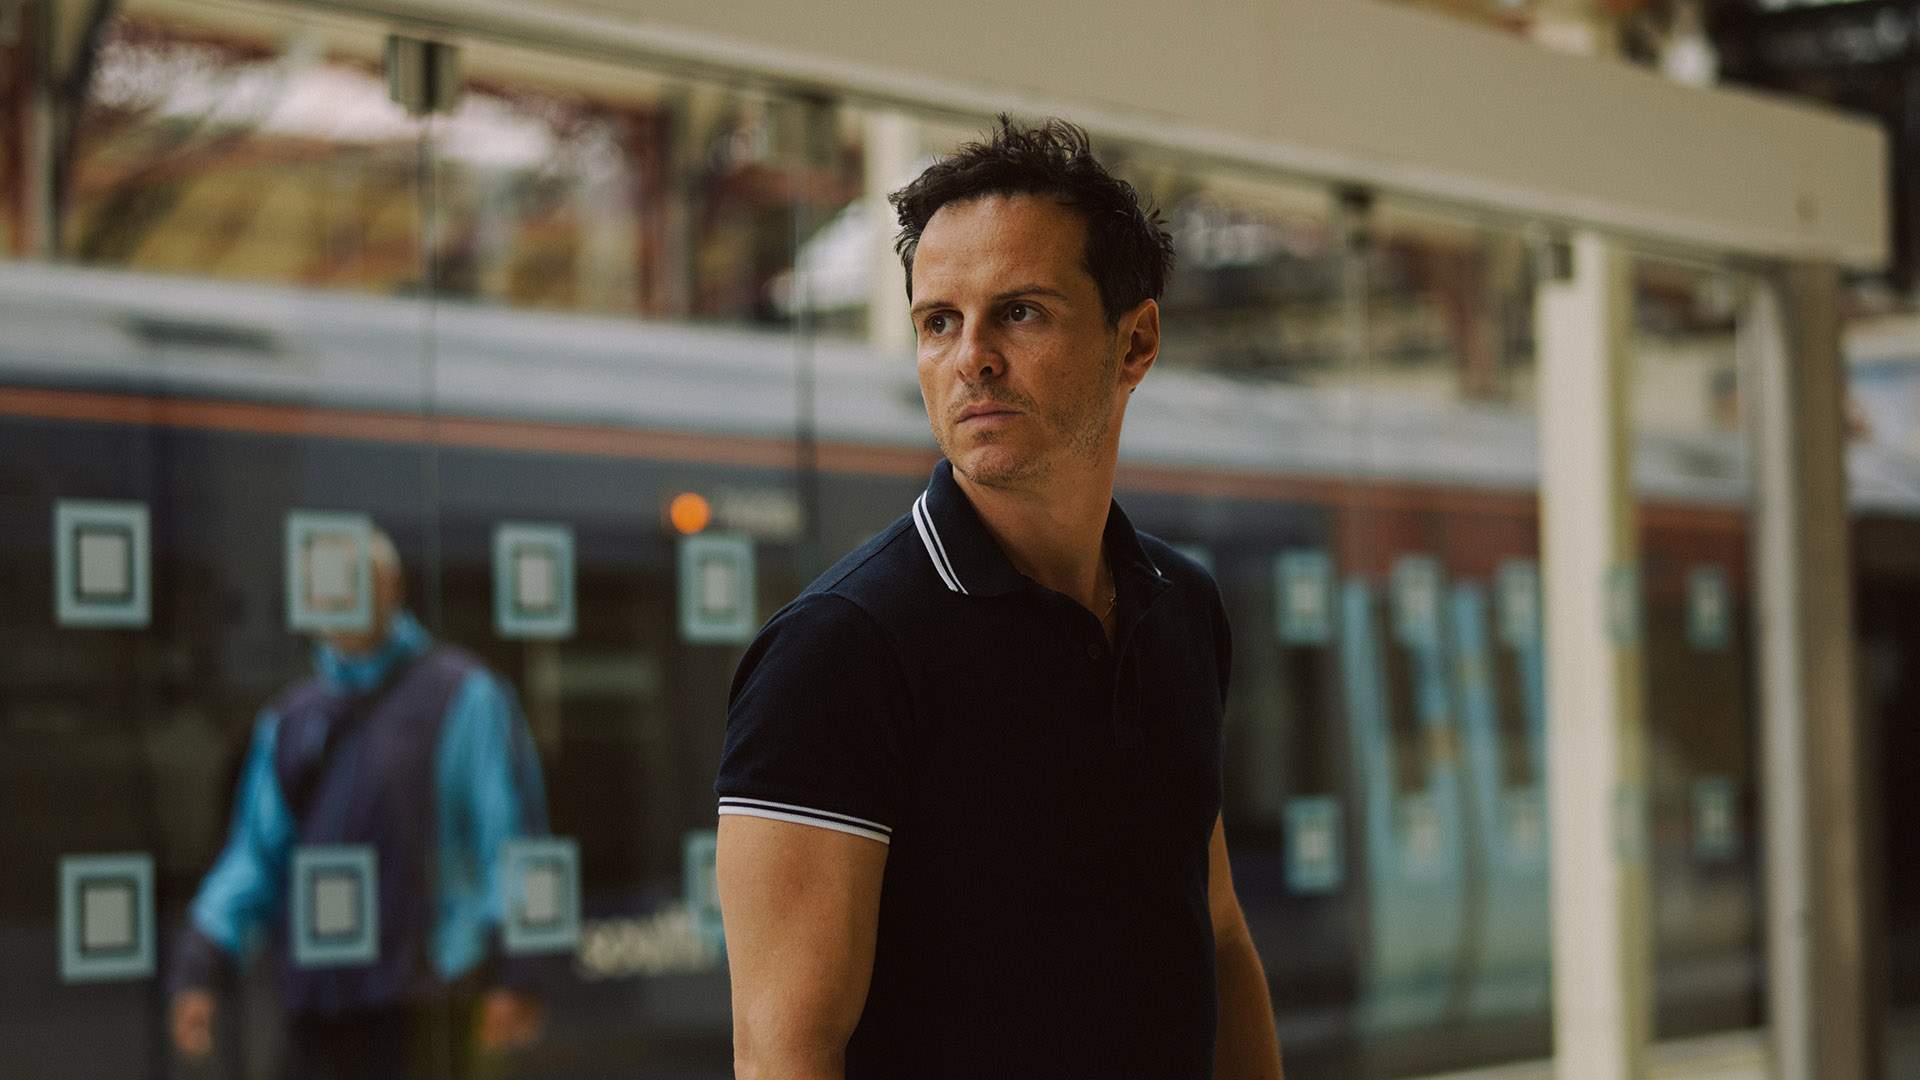 Andrew Scott, Josh O'Connor and Cailee Spaeny Will Be Among the Suspects in 'Wake Up Dead Man: A Knives Out Mystery'